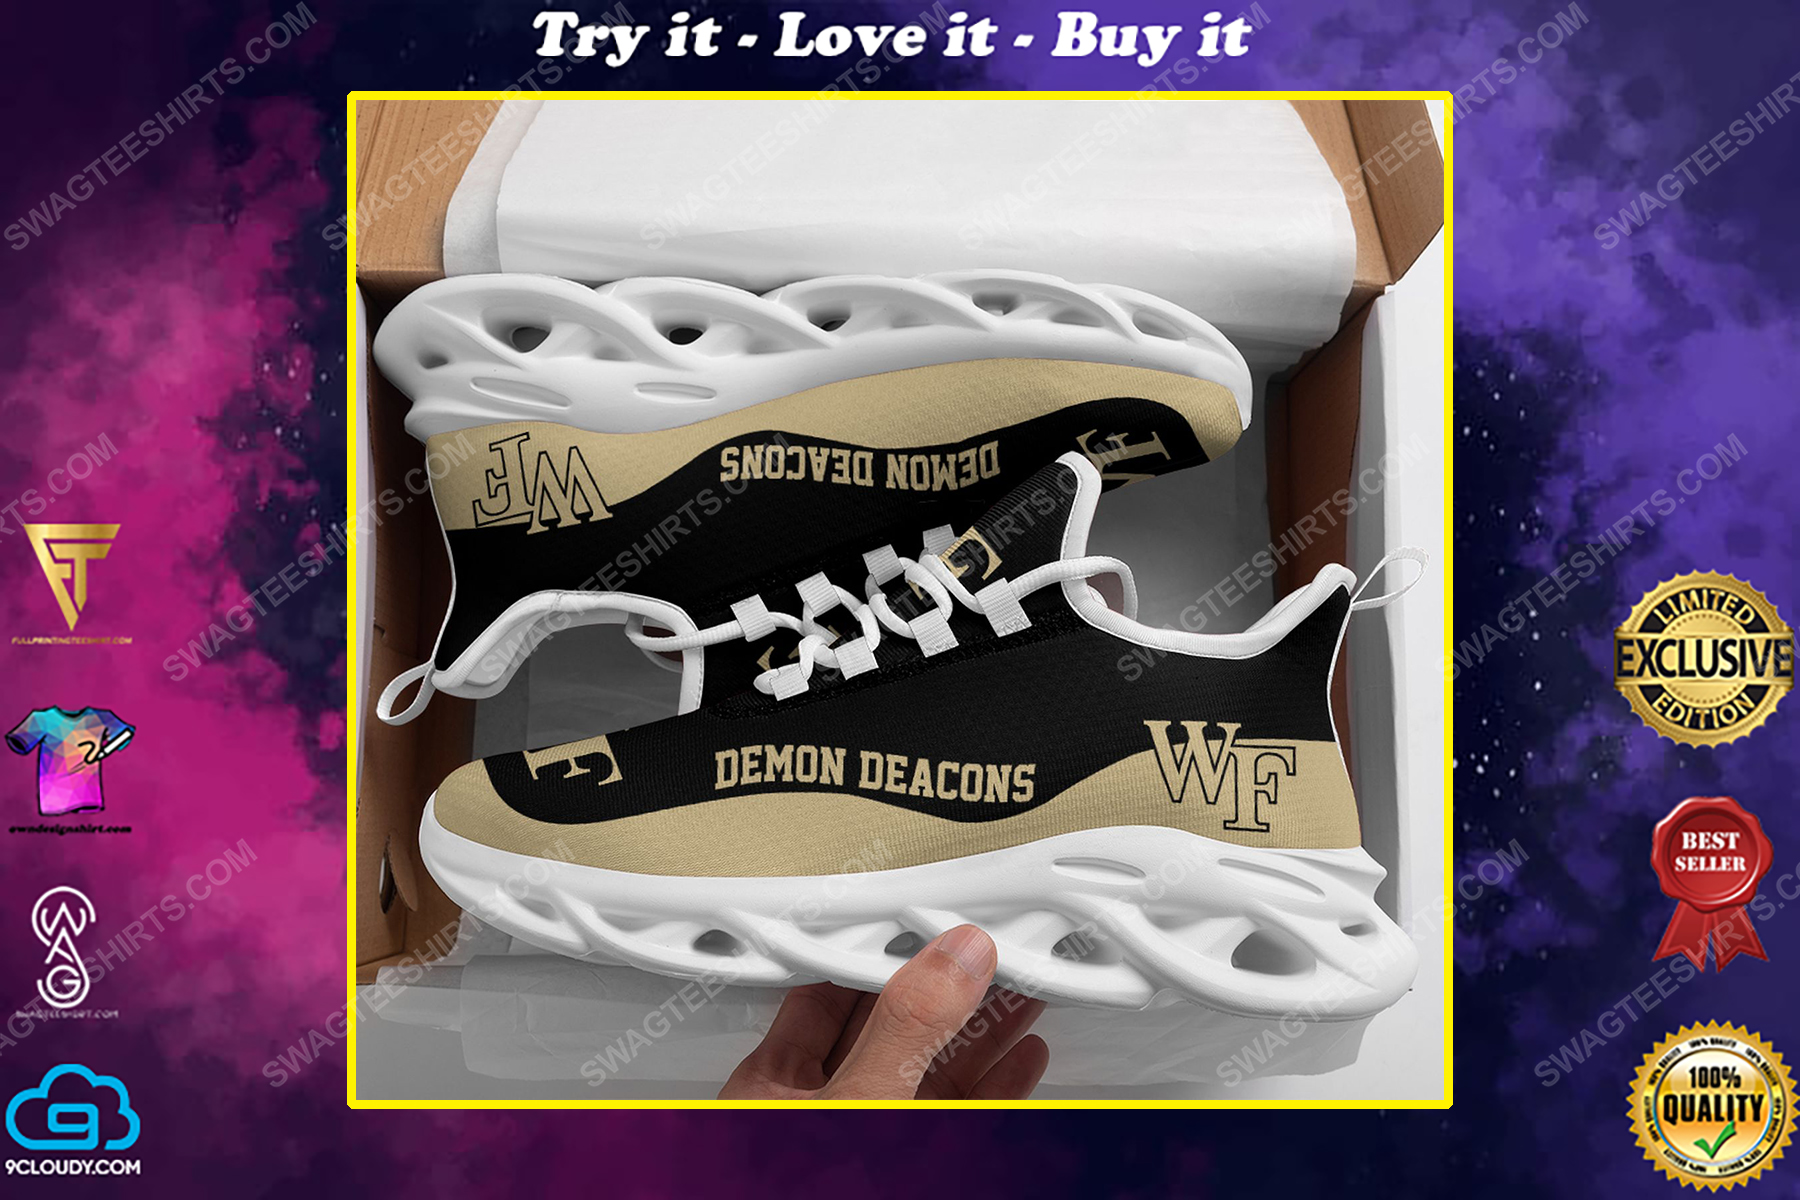 Wake forest demon deacons football team max soul shoes